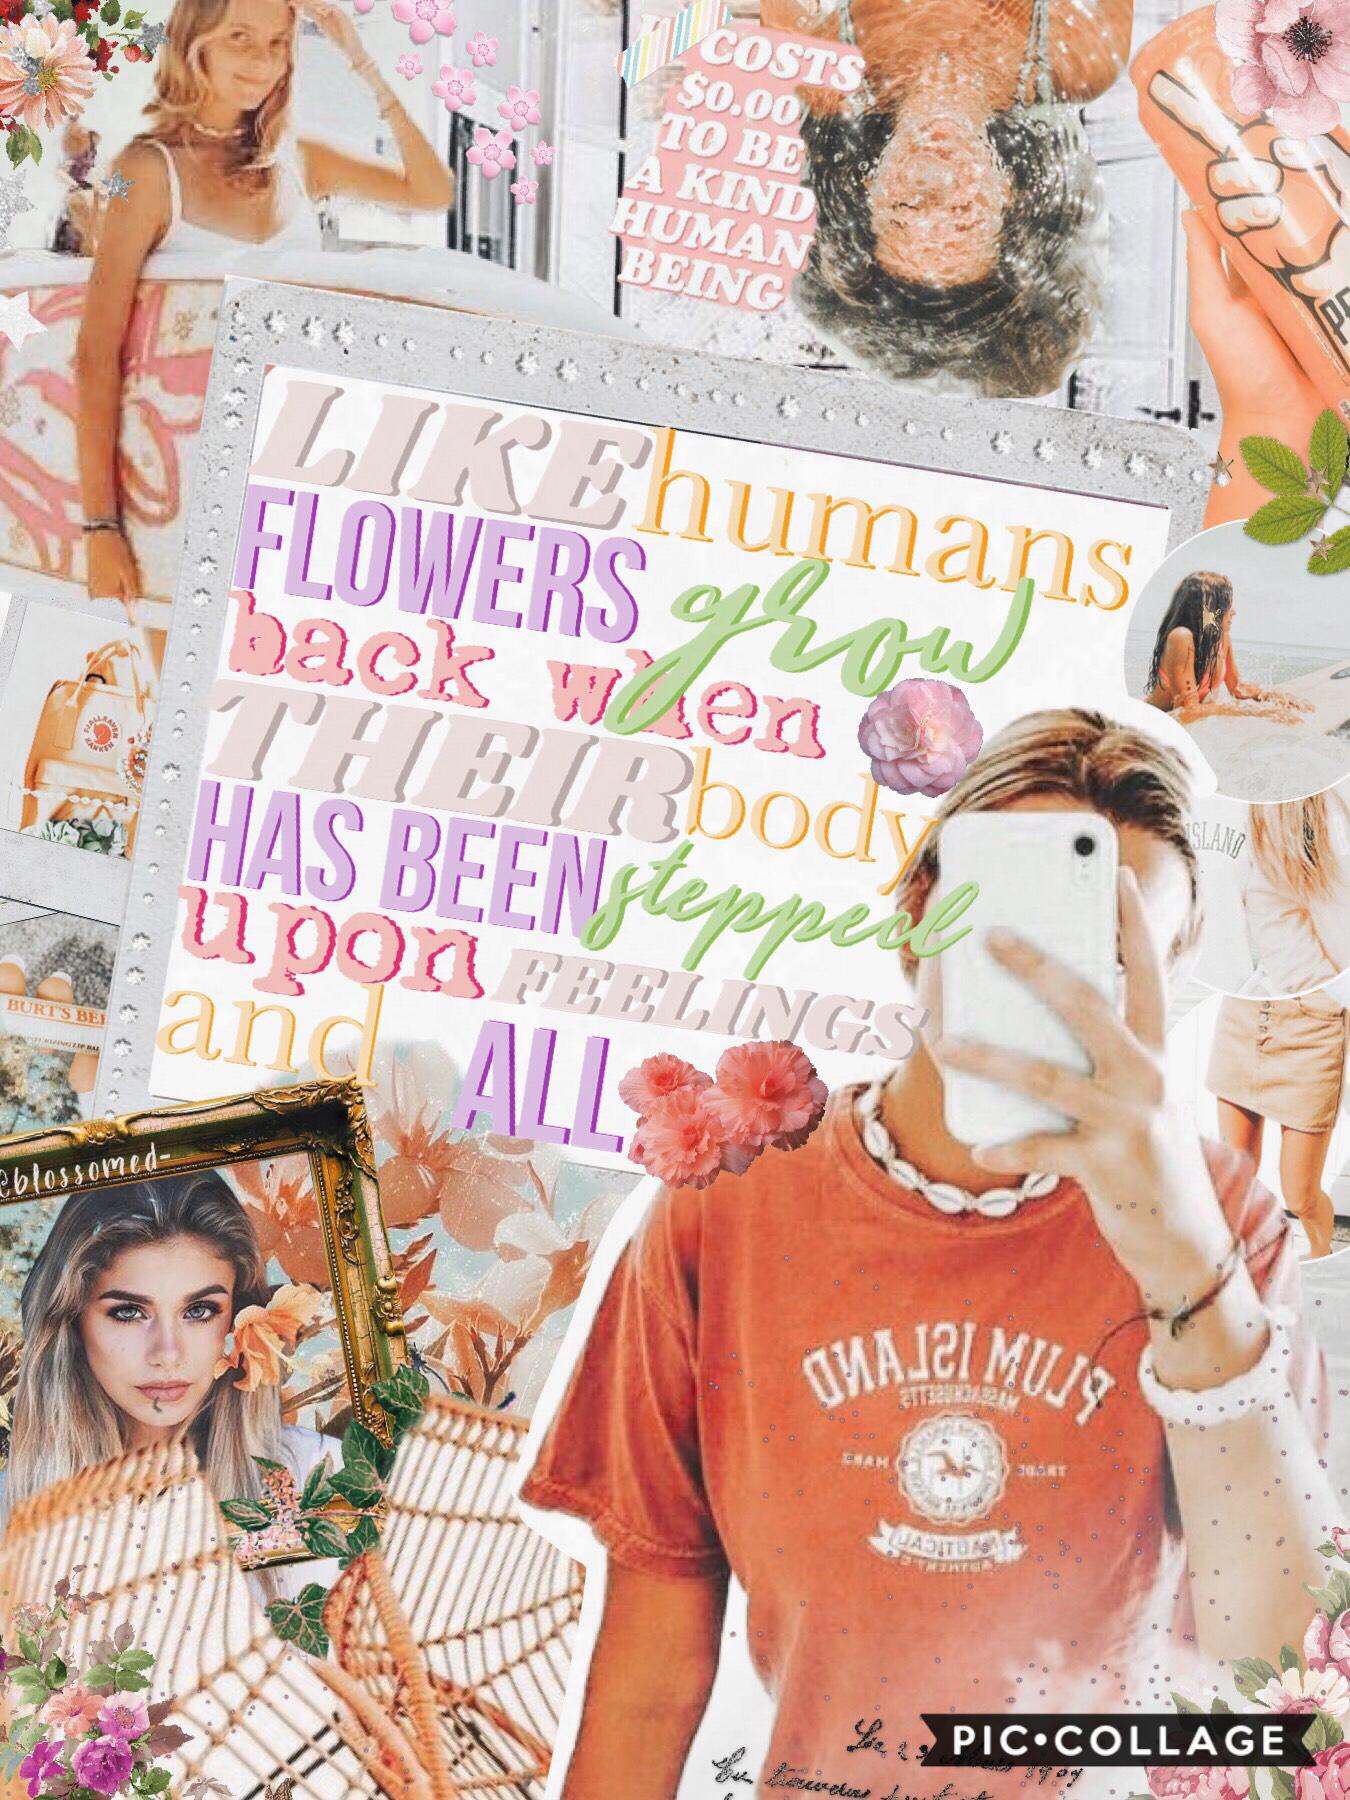 hiya guys! 🌸
so how is everyone? I’m just super upset that my collages have been deleted😣 but otherwise life’s been good so far 🐝 ✨ QOTD: what’s your favourite hobby? AOTD: probably pc and reading🐚